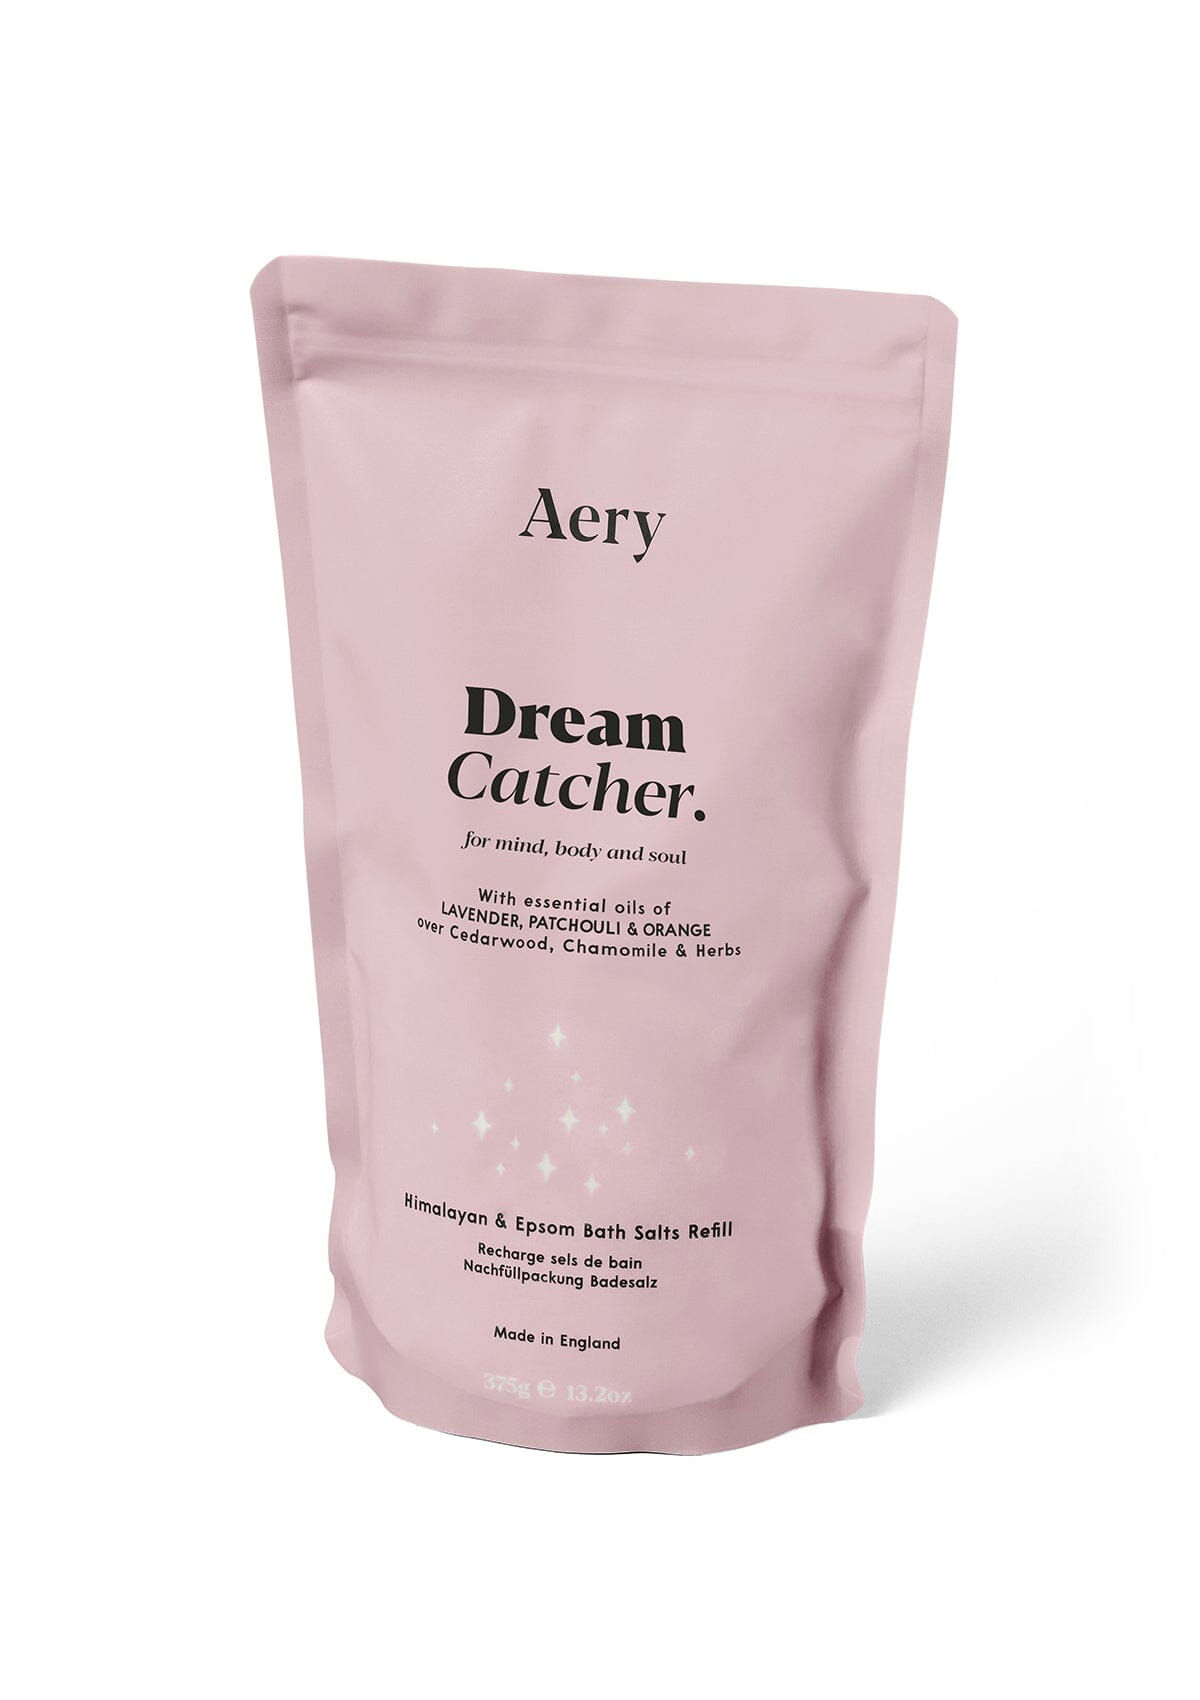 Lilac Dream Catcher bath salts refill pouch by Aery displayed on white background